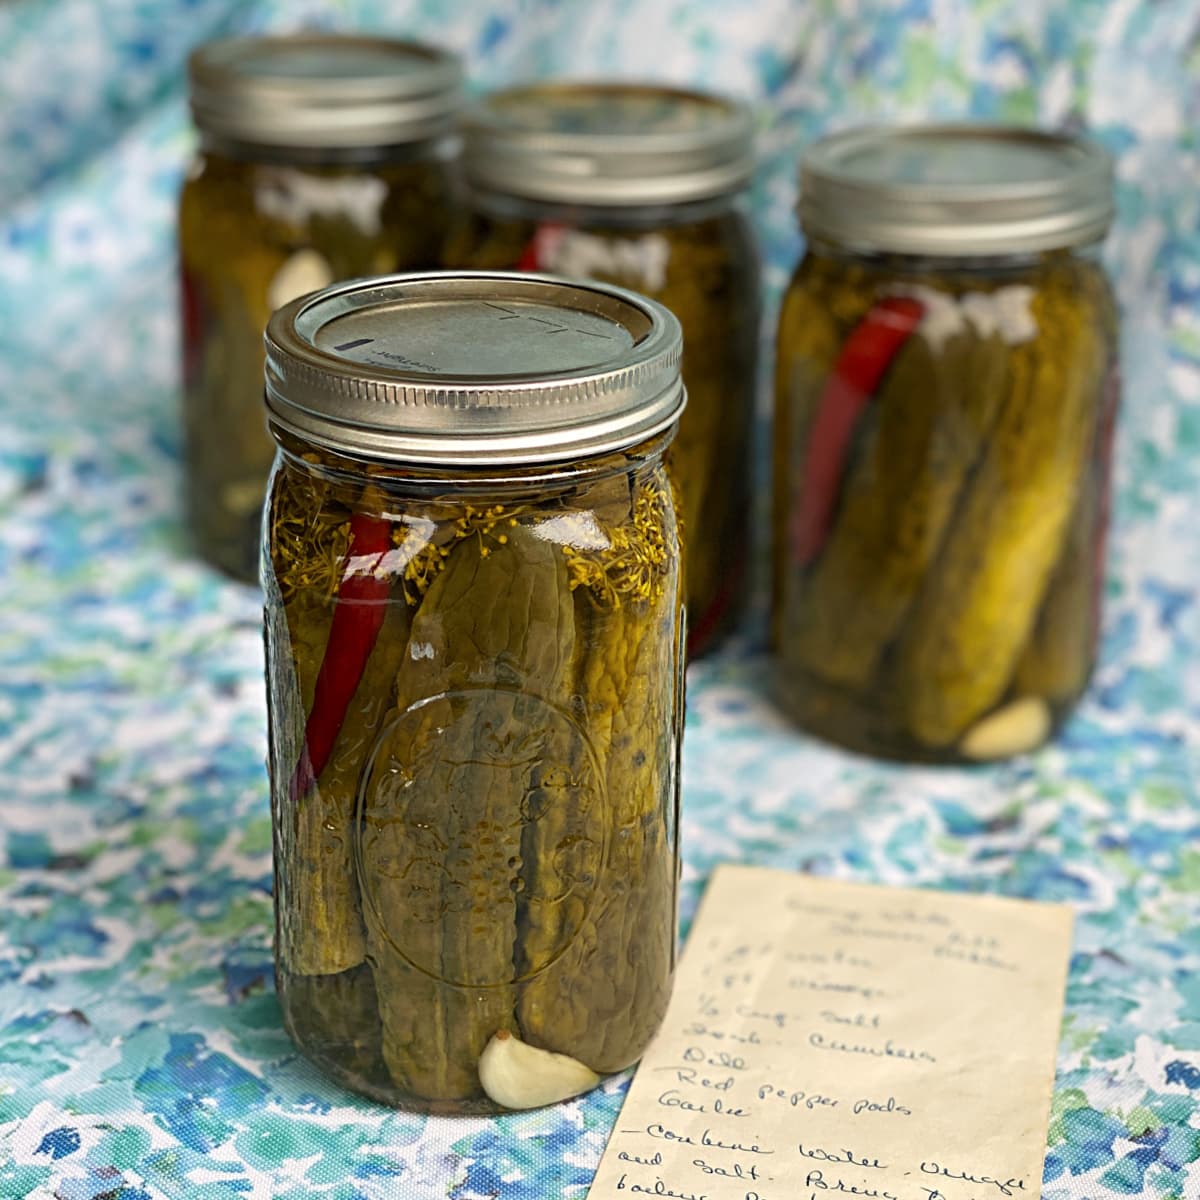 Four jars of processed spicy dill pickles, ready for the shelf. Old handwritten recipe in the foreground. 